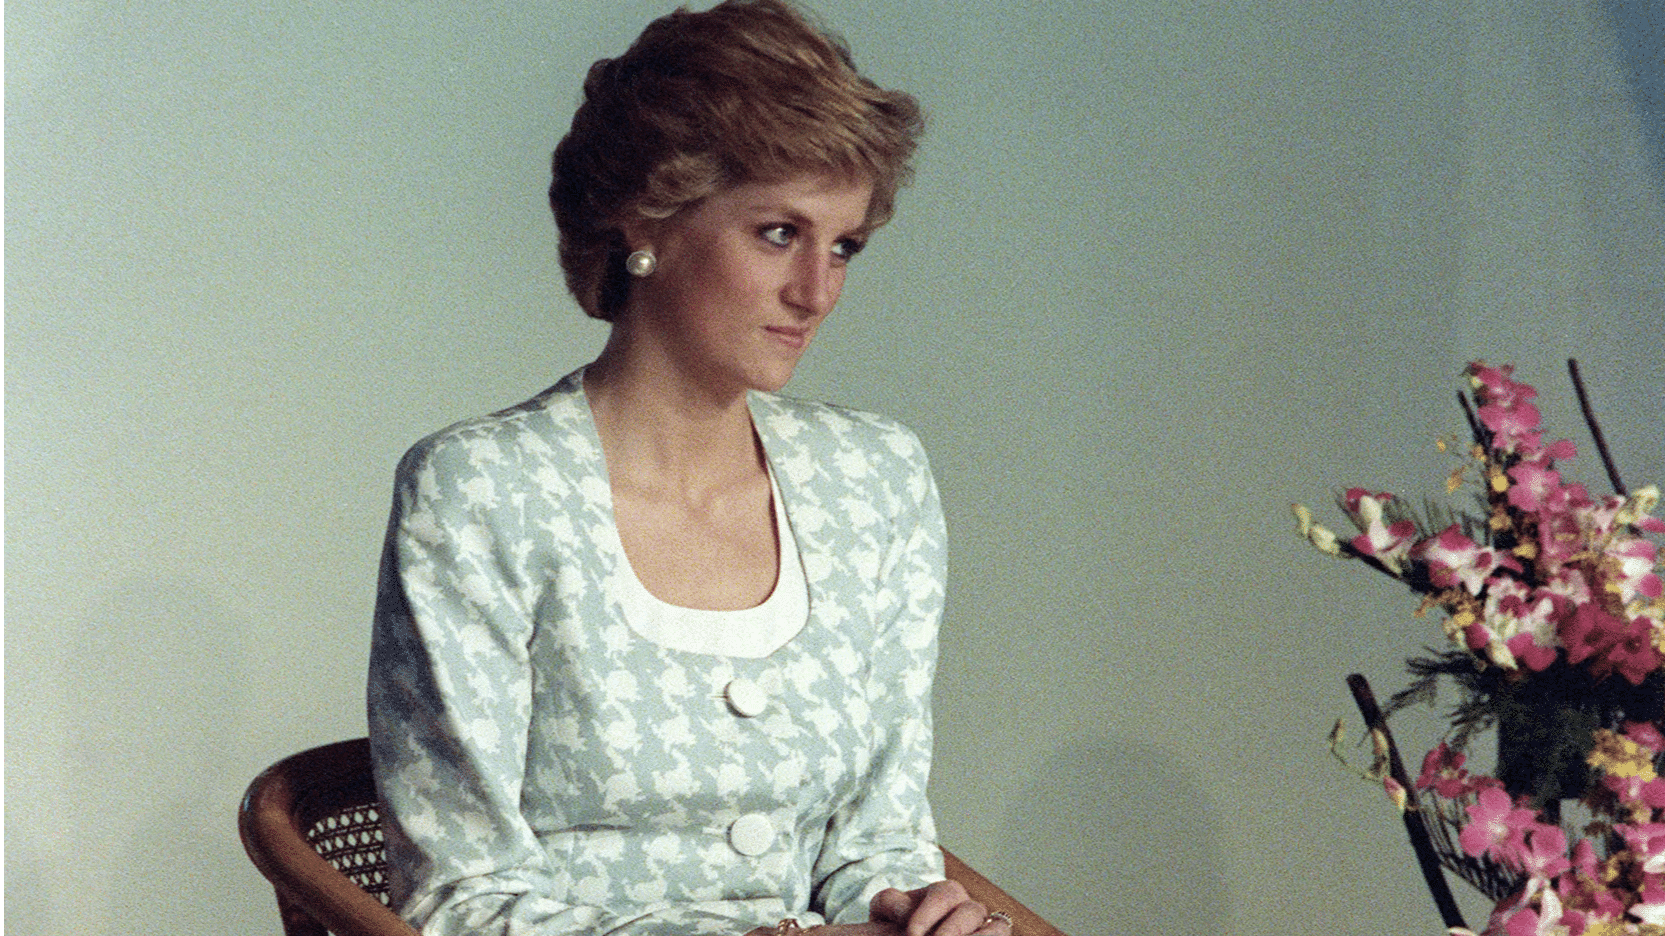 BBC used ‘deception’ to land 1995 Princess Diana interview, inquiry finds